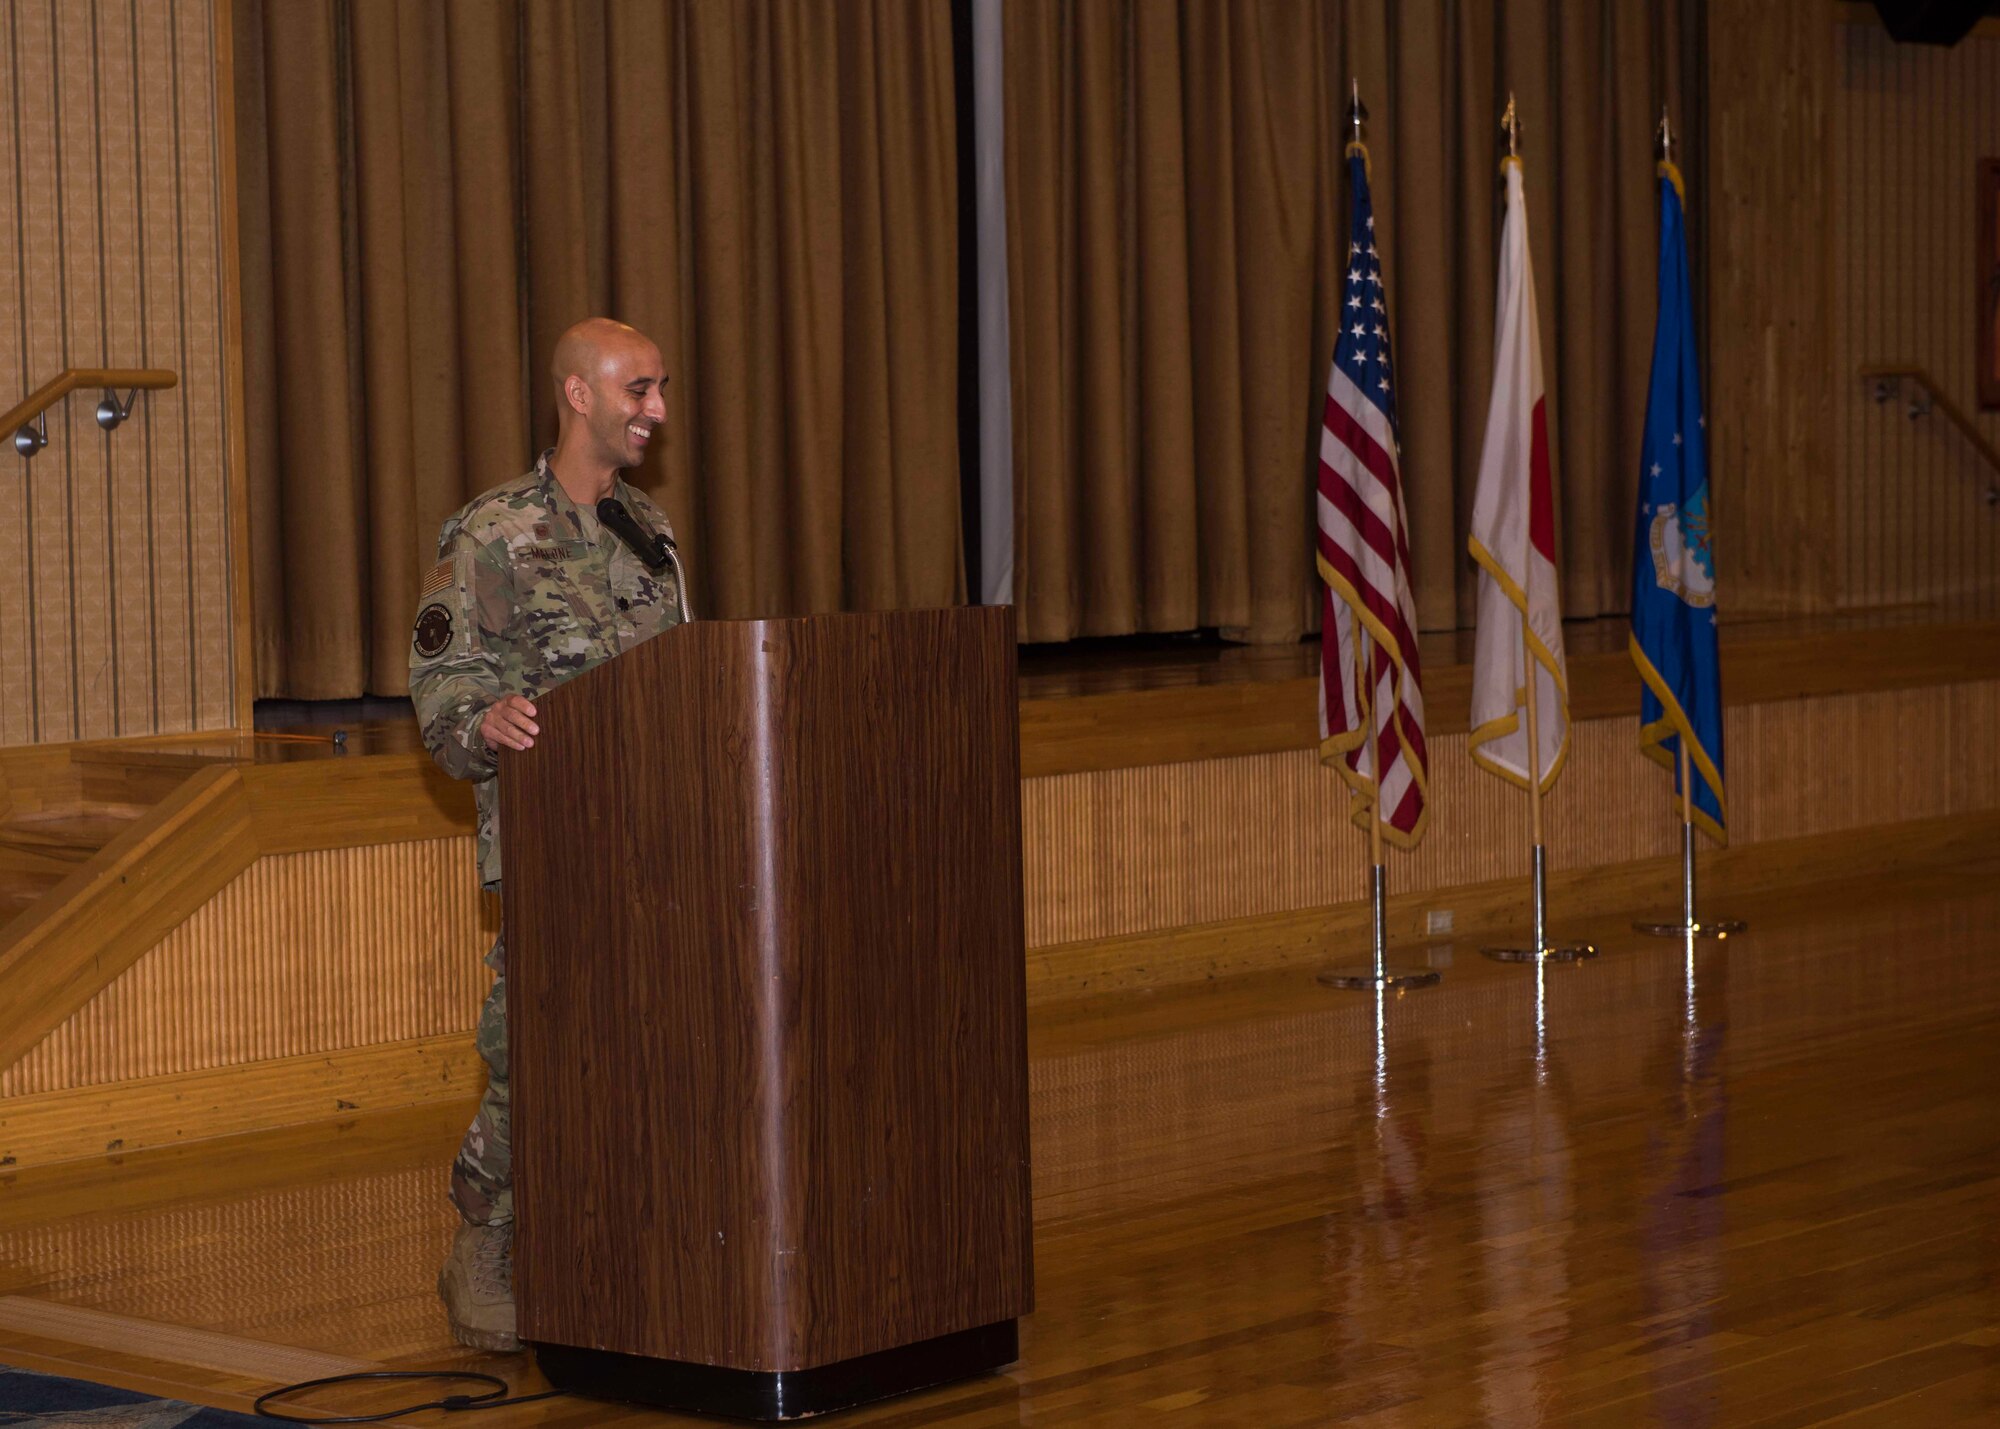 A service member talks while standing behind a podium.